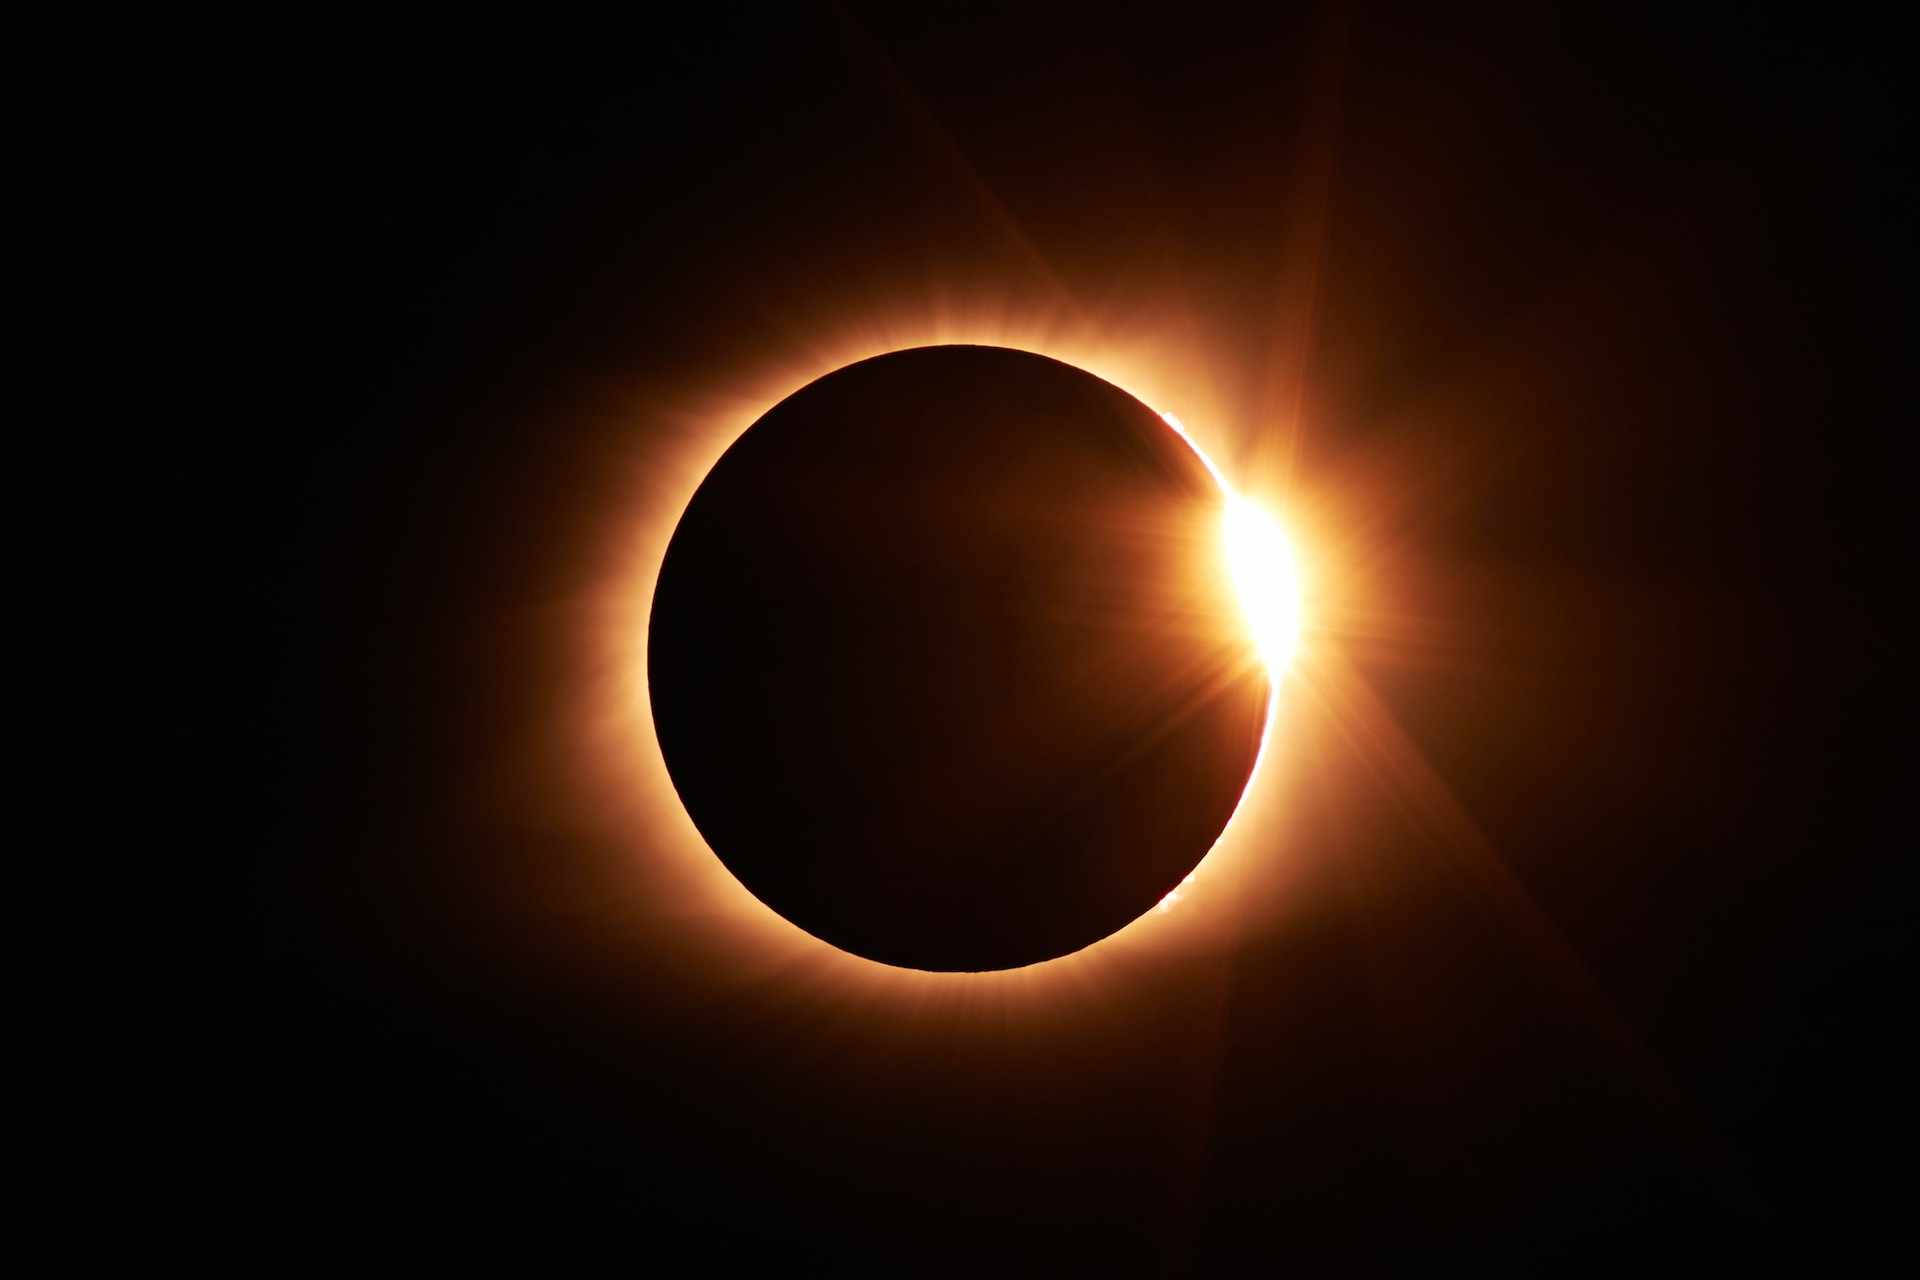 How to Market RV Rentals for The 2024 Solar Eclipse